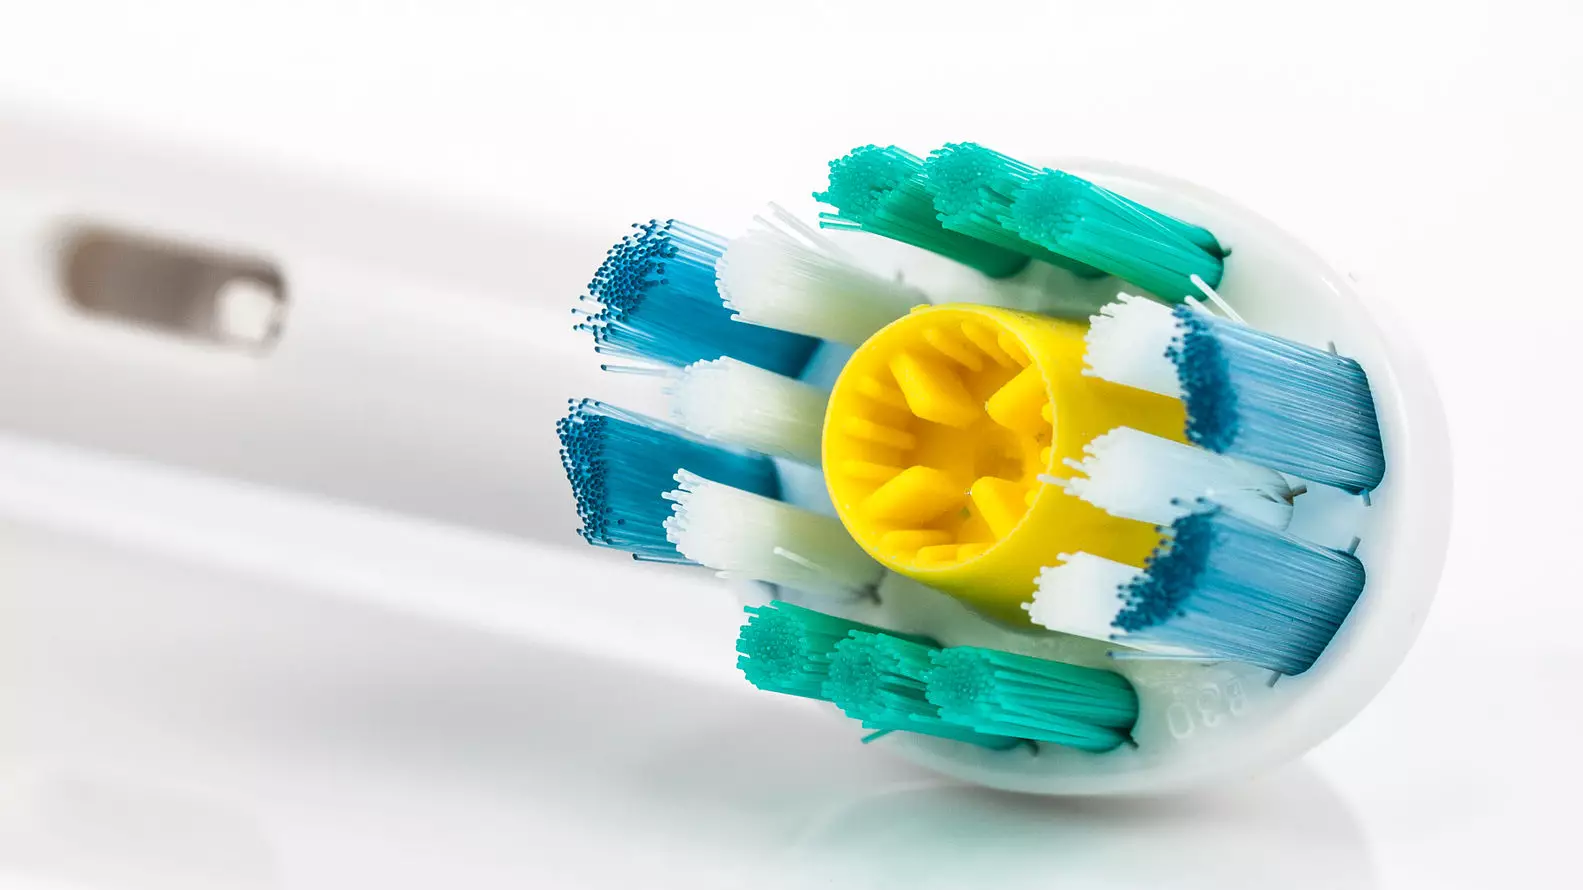 Gynaecologist Warns Women Not To Use Electric Toothbrushes To Pleasure Themselves